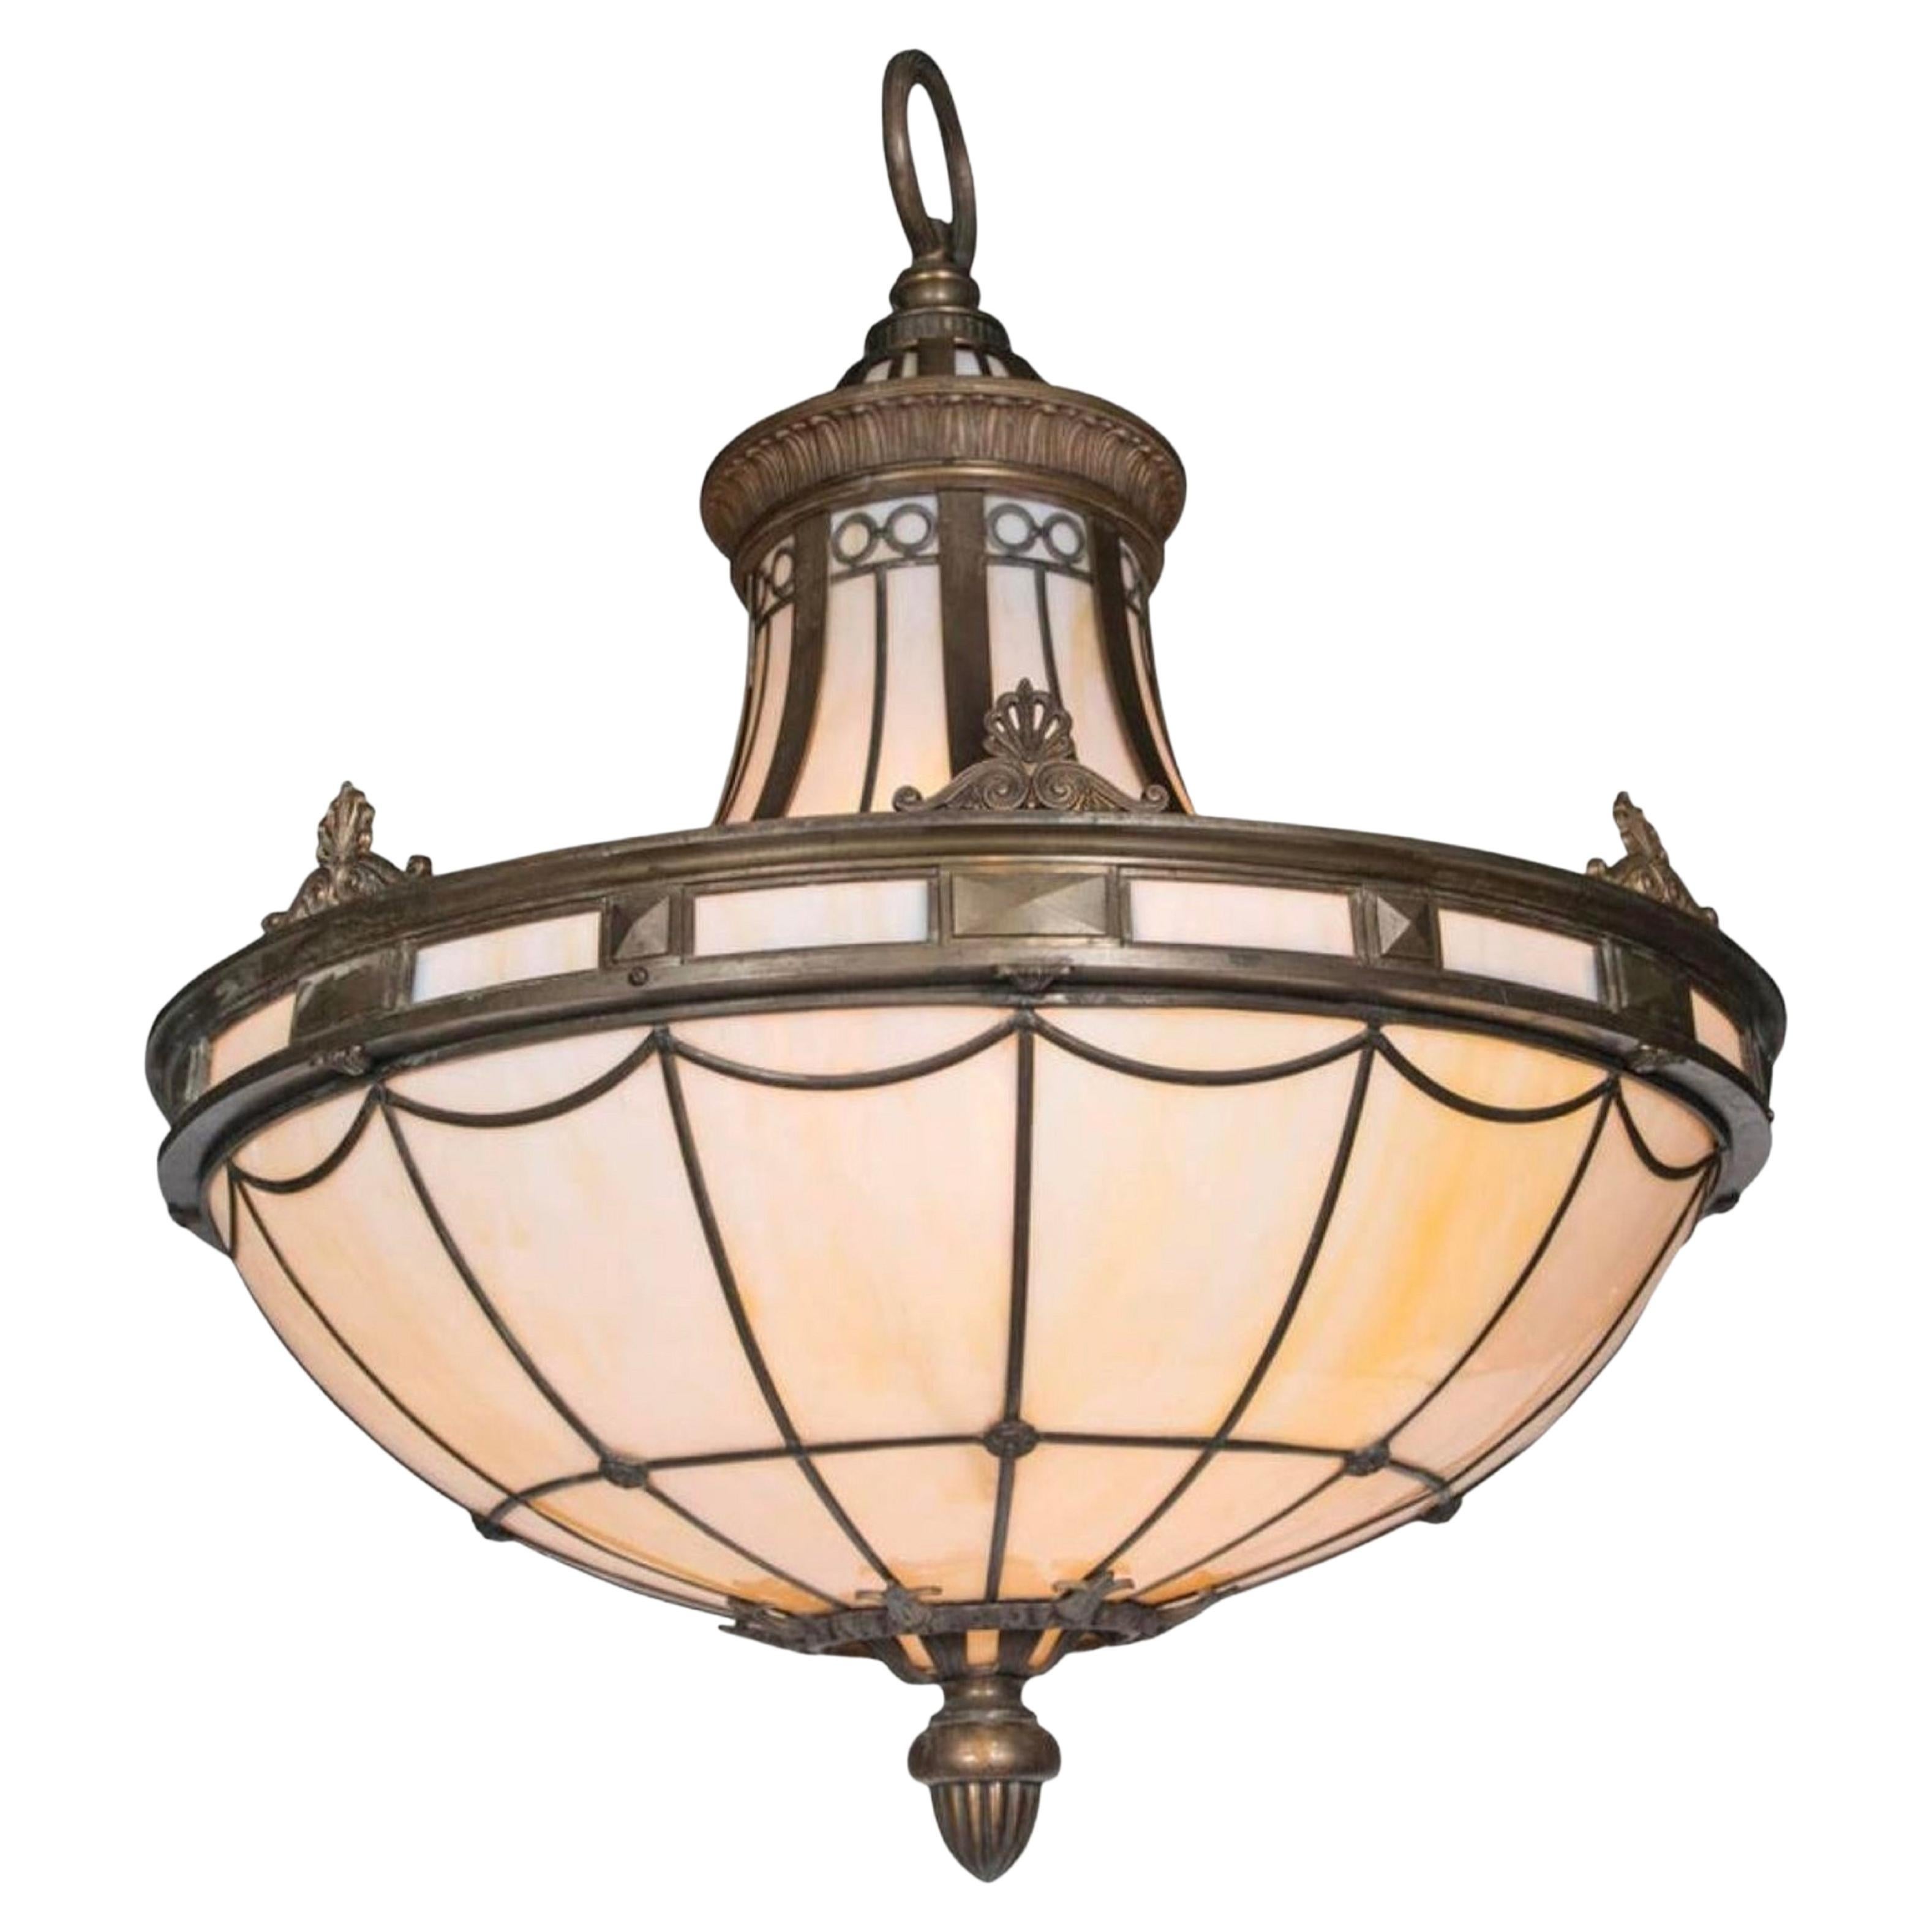 1900s Caldwell Leaded Glass Light Fixture For Sale